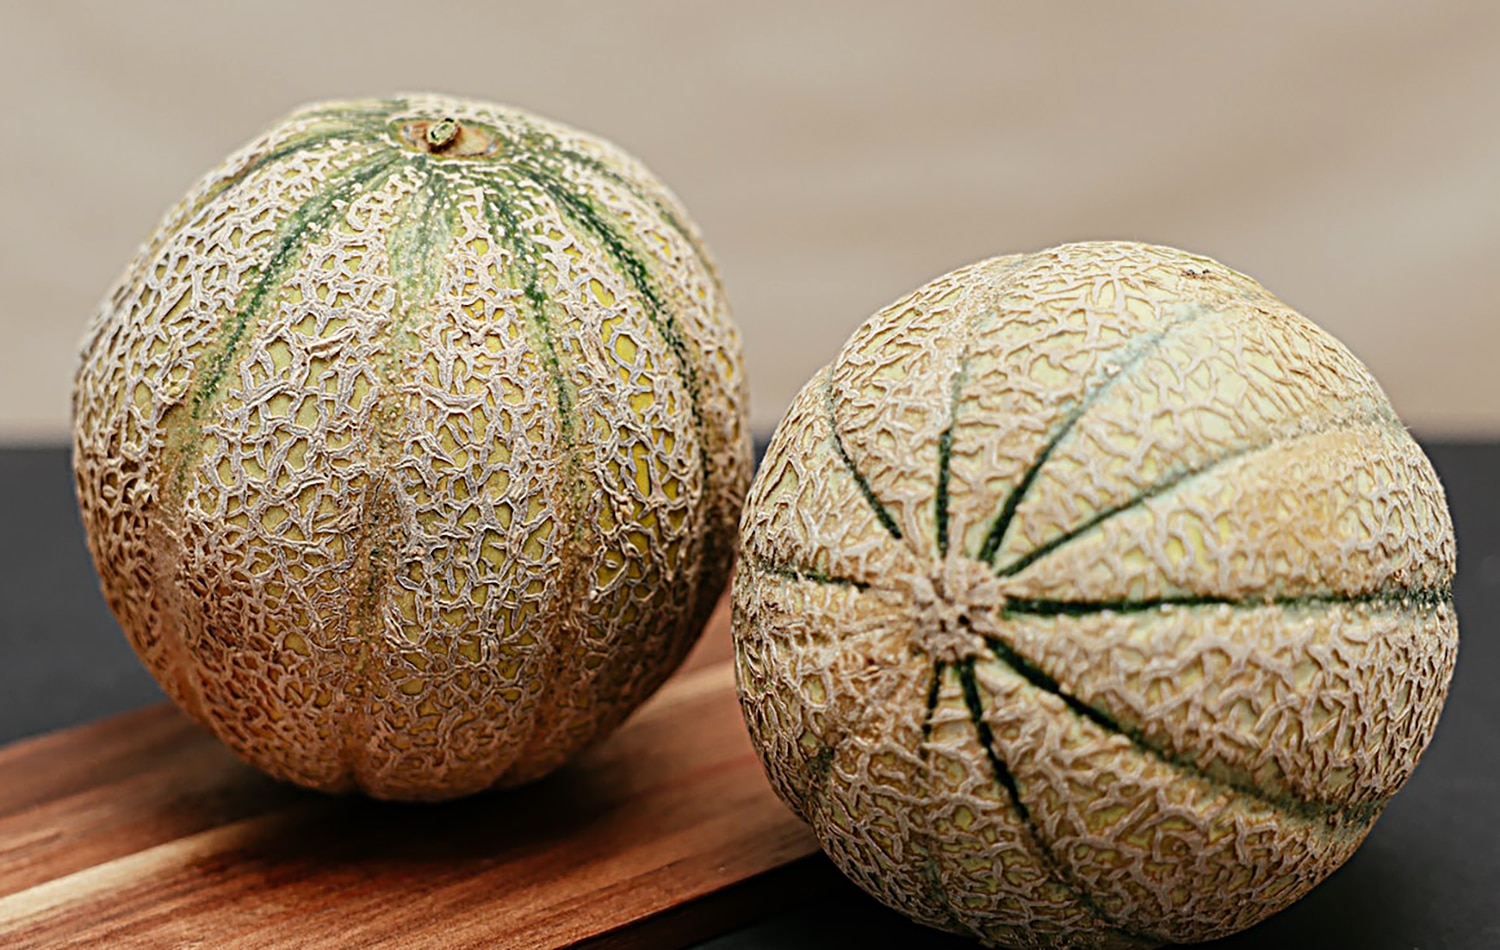 horizontal photo of 2 cantaloupe melons on a wooden cutting board. Image credit https://www.pexels.com/photo/melons-on-a-wooden-chopping-board-7657268/